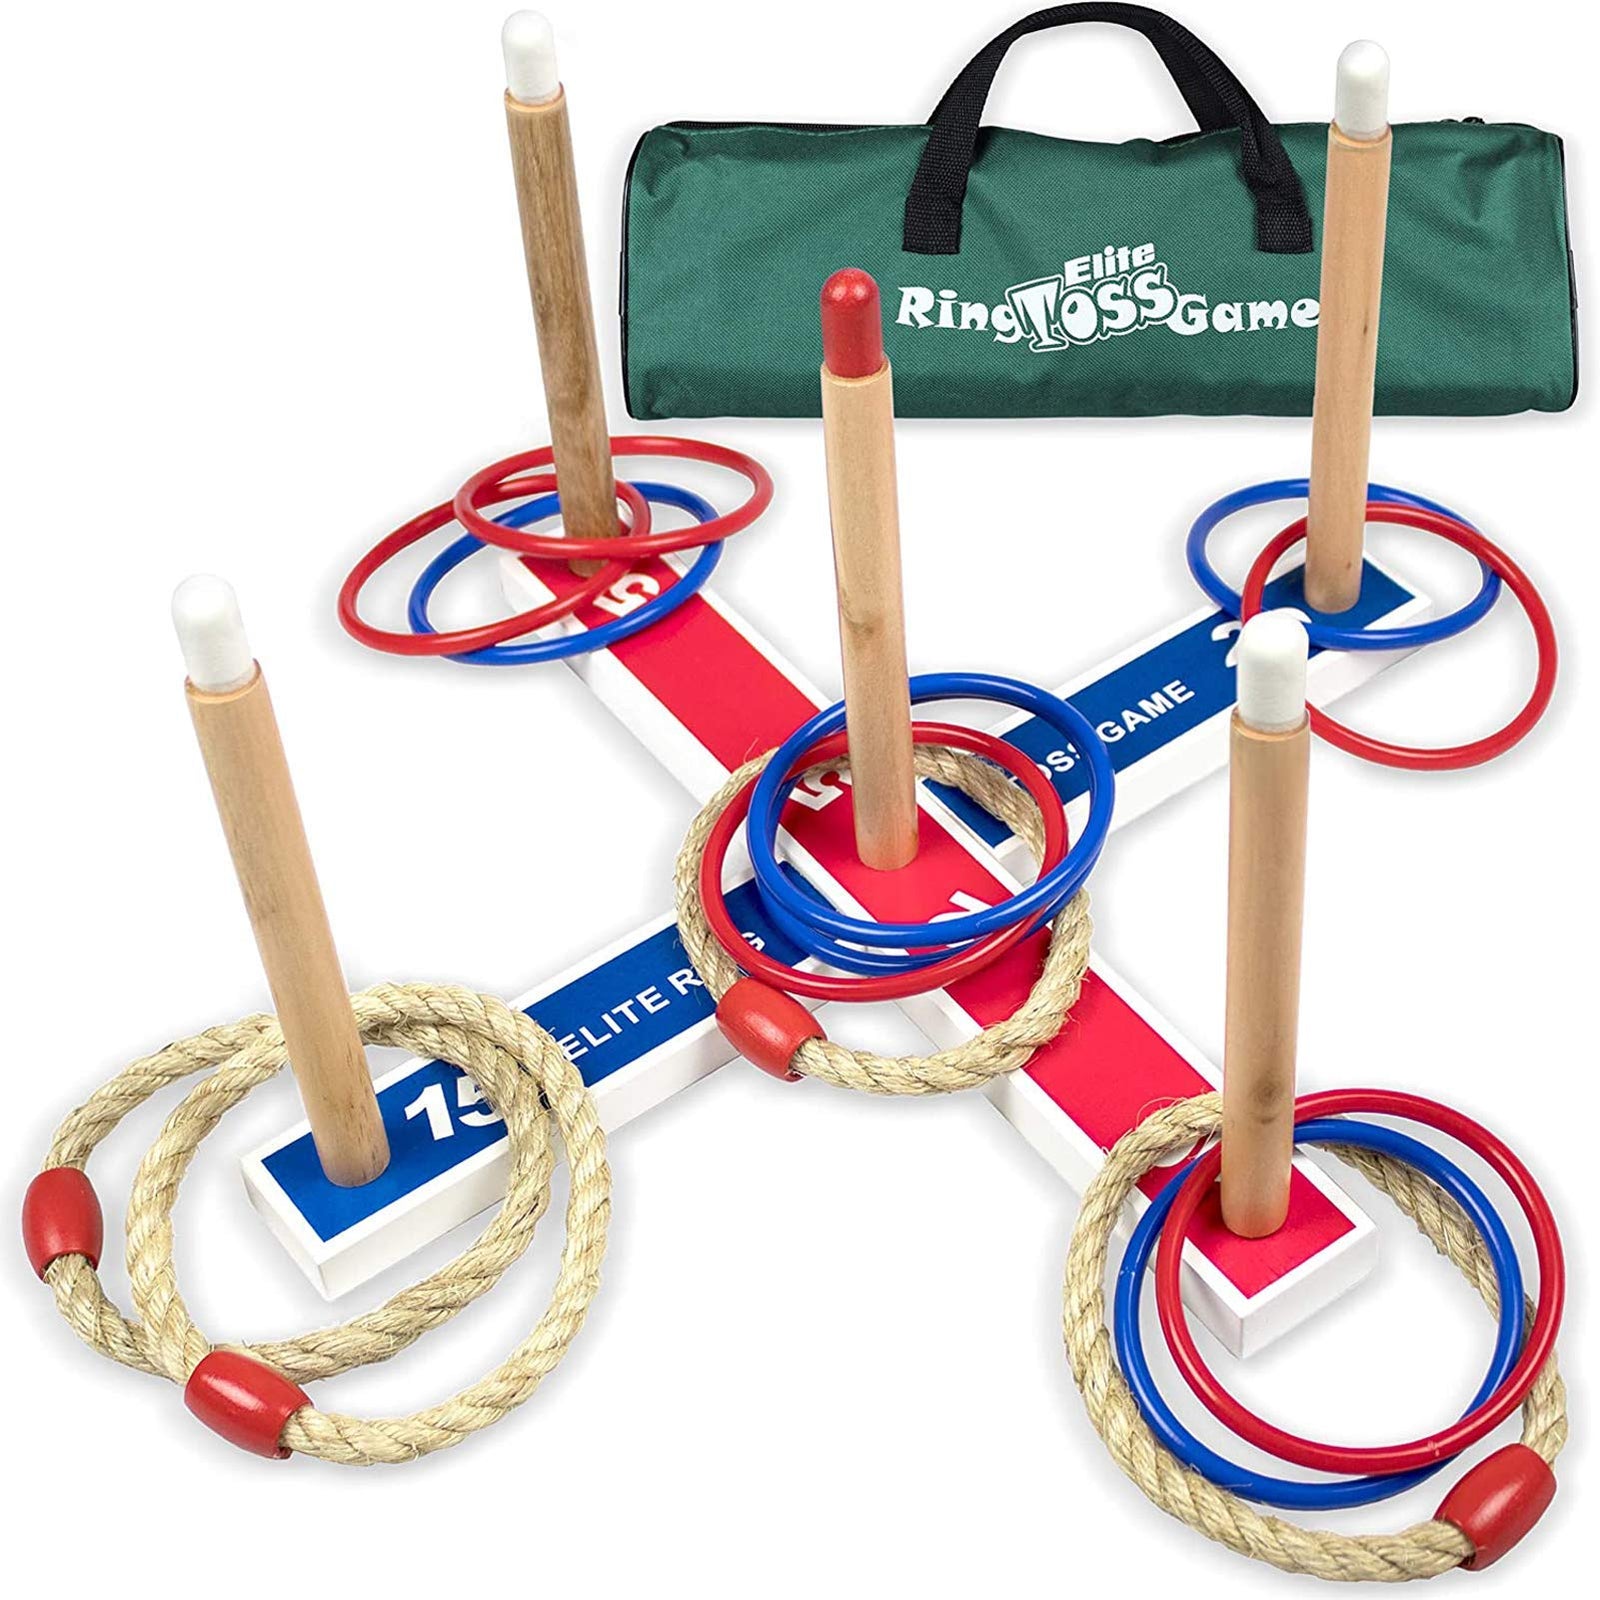 Elite Sportz Ring Toss Games for Kids - Indoor Holiday Fun or Outdoor Yard Game for Adults & Family - Easy to Set Up w/ Compact Carry - Backyard Toys